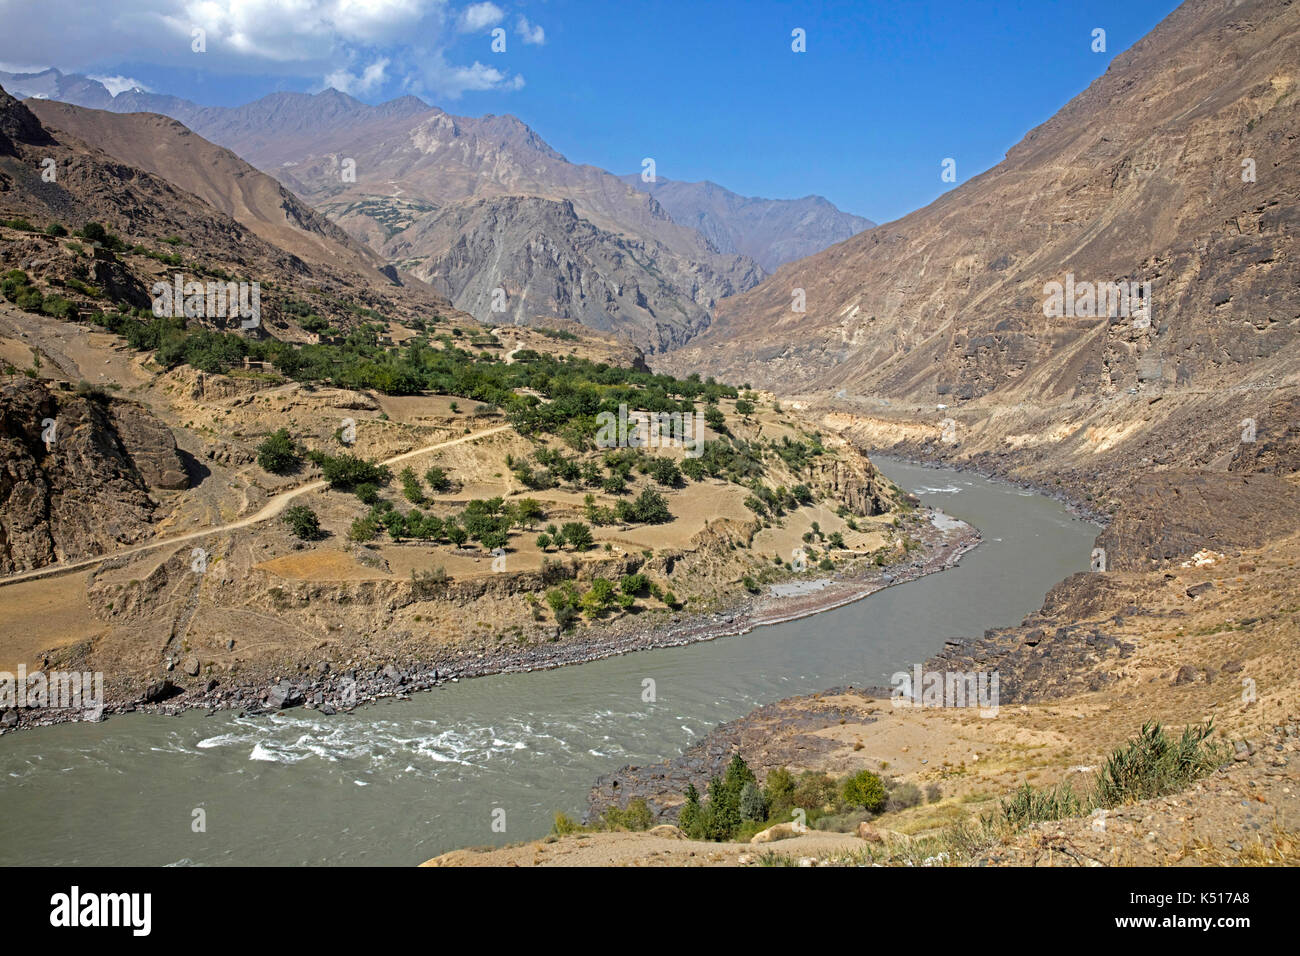 The Pamir Highway / M41 along the Panji River marking the border between Tajikistan and Afghanistan Stock Photo